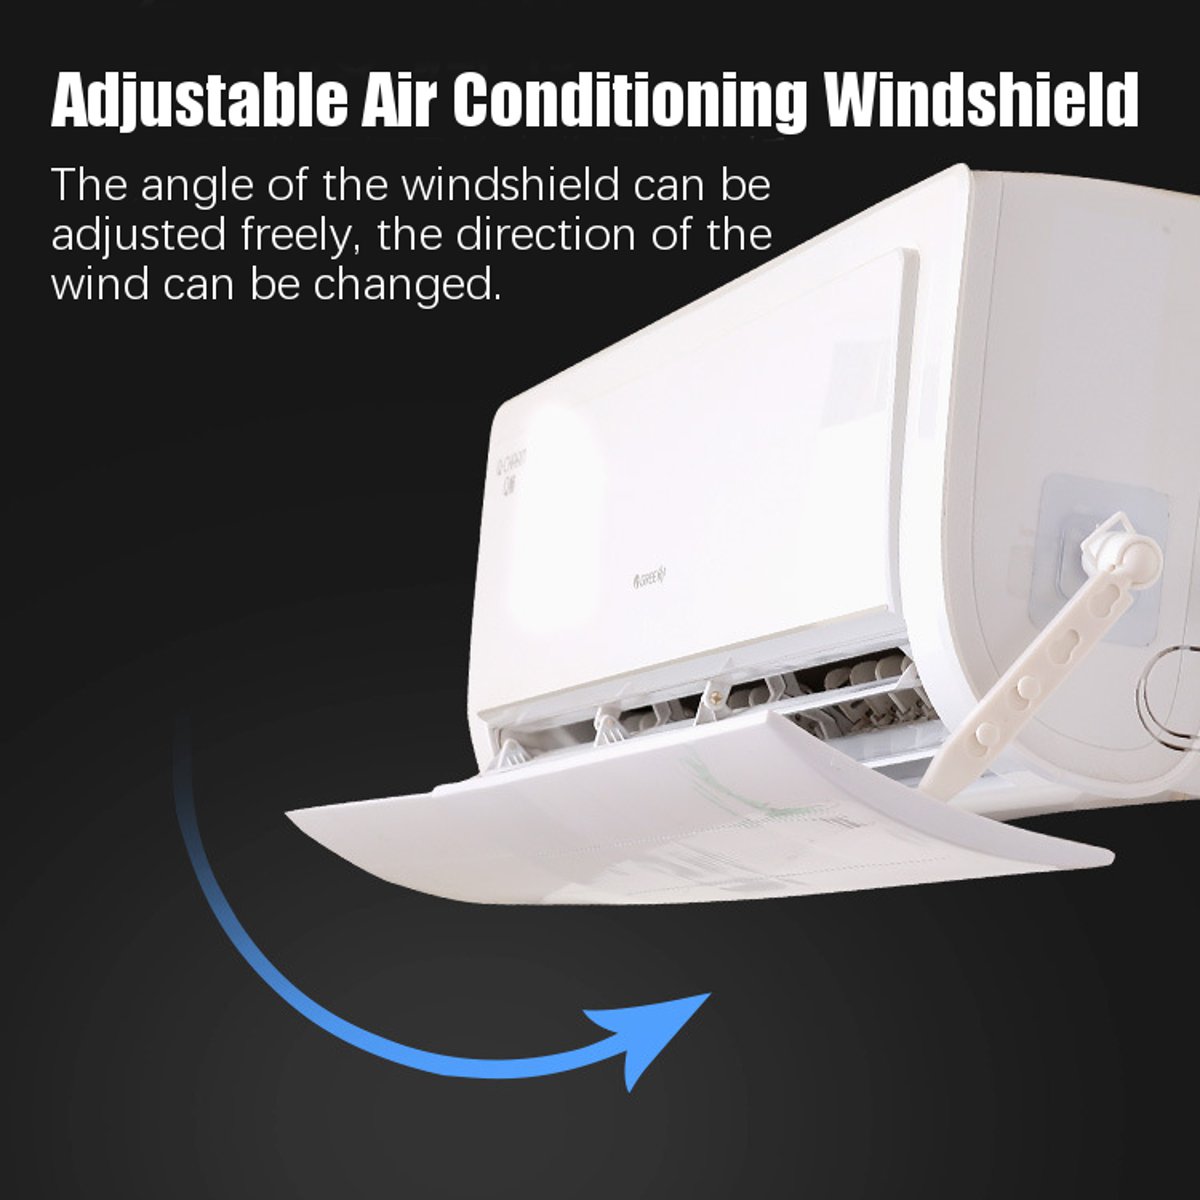 Adjustable-Air-Conditioner-Wind-Shield-Air-Conditioning-Baffle-Windshield-Home-Cooler-Windproof-1535791-1